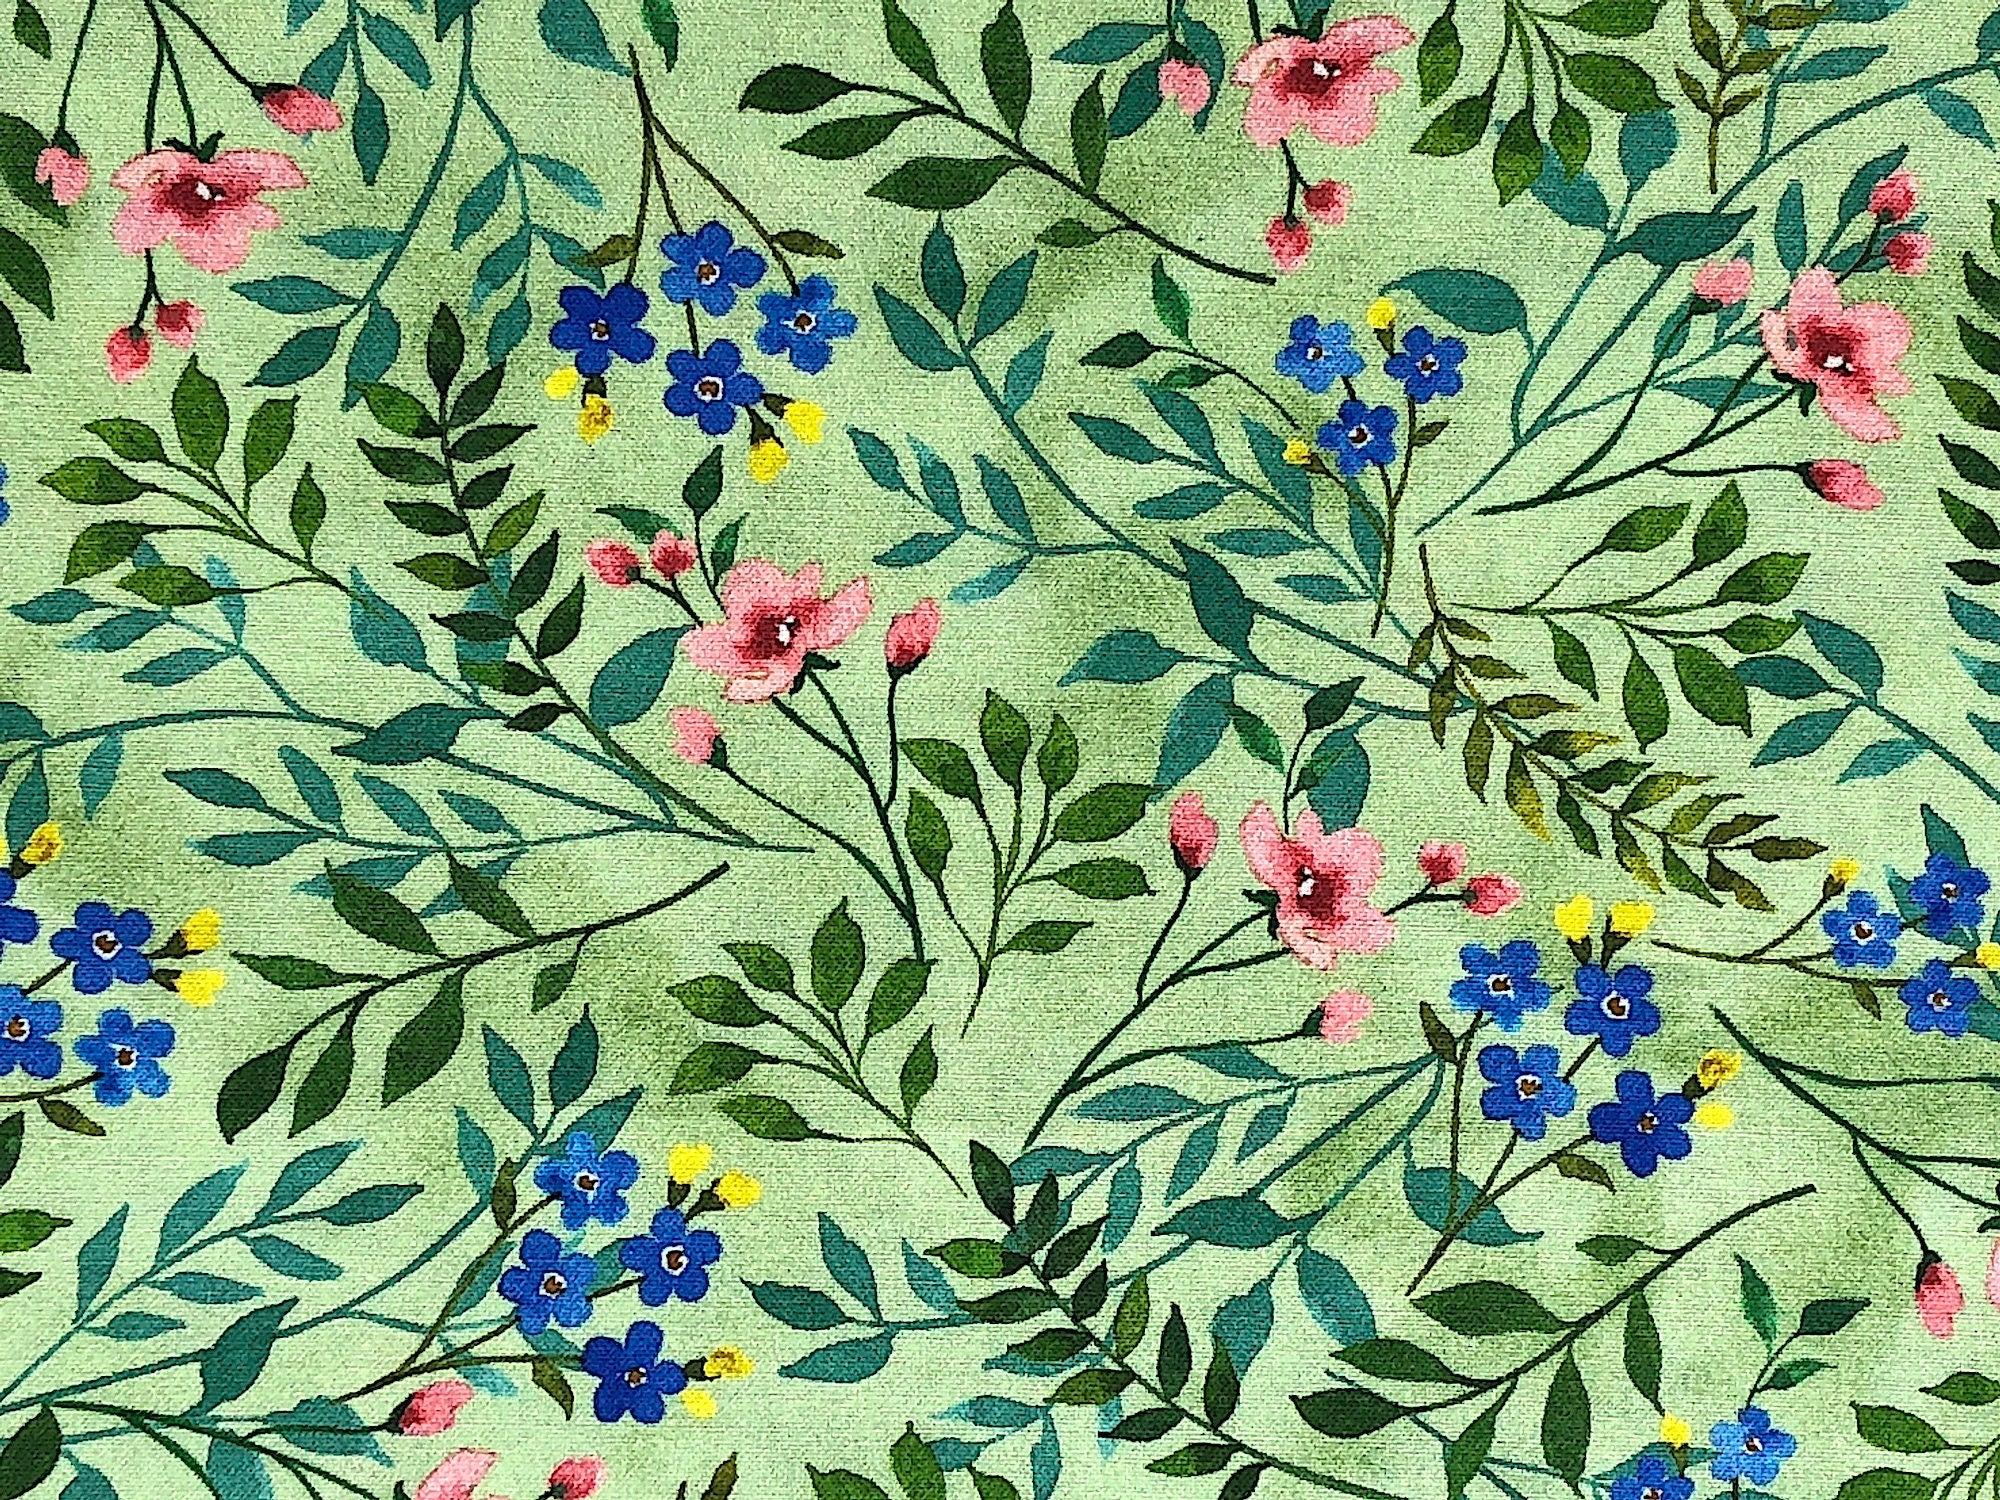 This pretty fabric is one from the Wildflower Farm Collection. Artist Jane Maday focuses on wildflowers in this collection. The colors are soft and cozy. This design has Pink, Blue, & Yellow Wildflowers - on a pretty Green Background. Combine this design with others from the collection for a garden lover's quilt and home decor accents